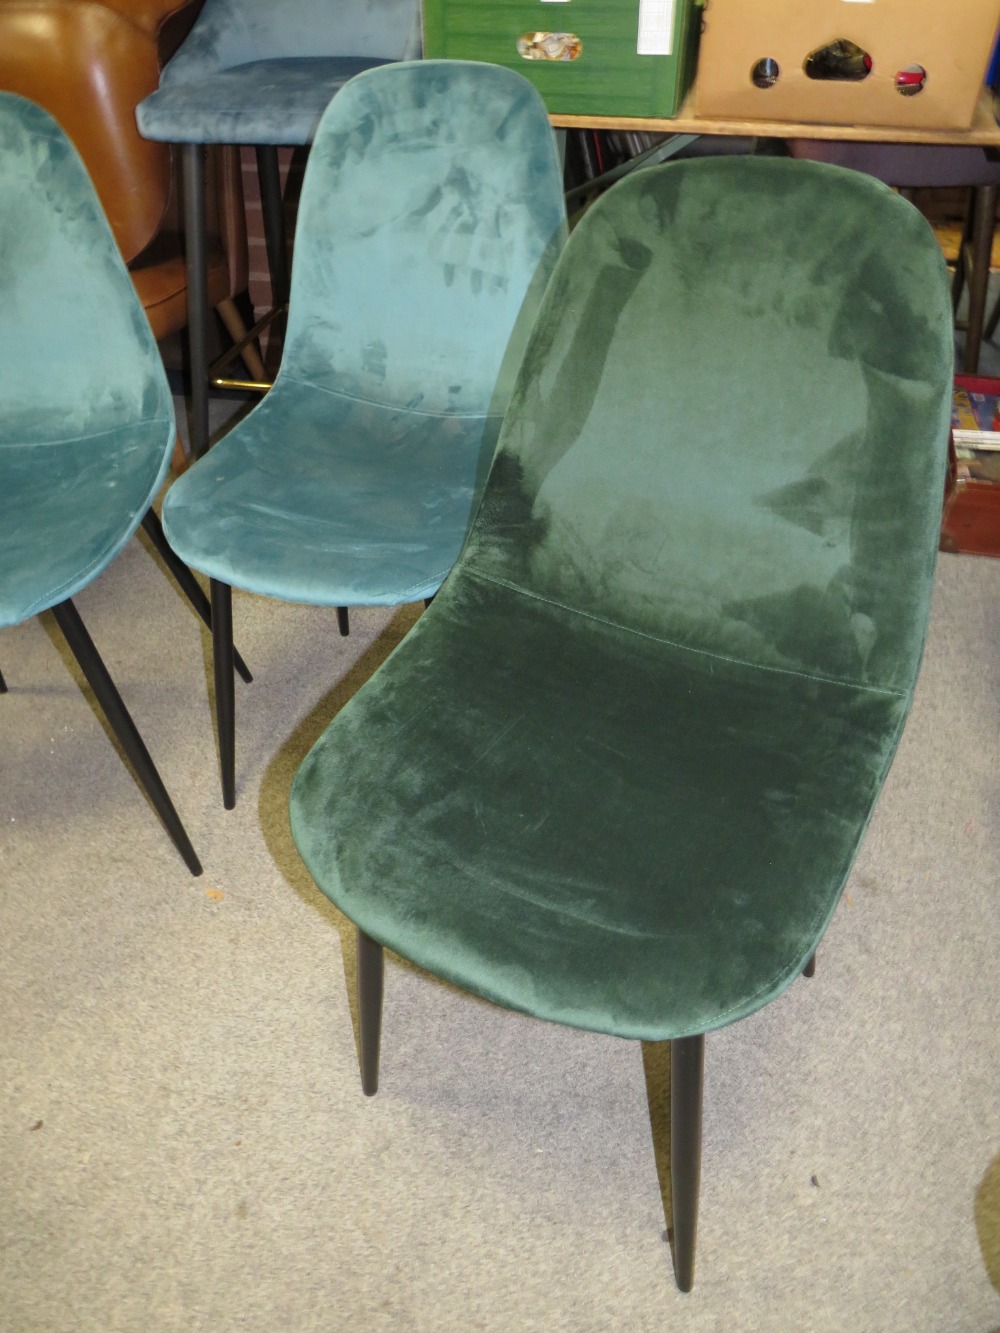 A MODERN HARLEQUIN SET OF FIVE DINING CHAIRS - Image 4 of 5